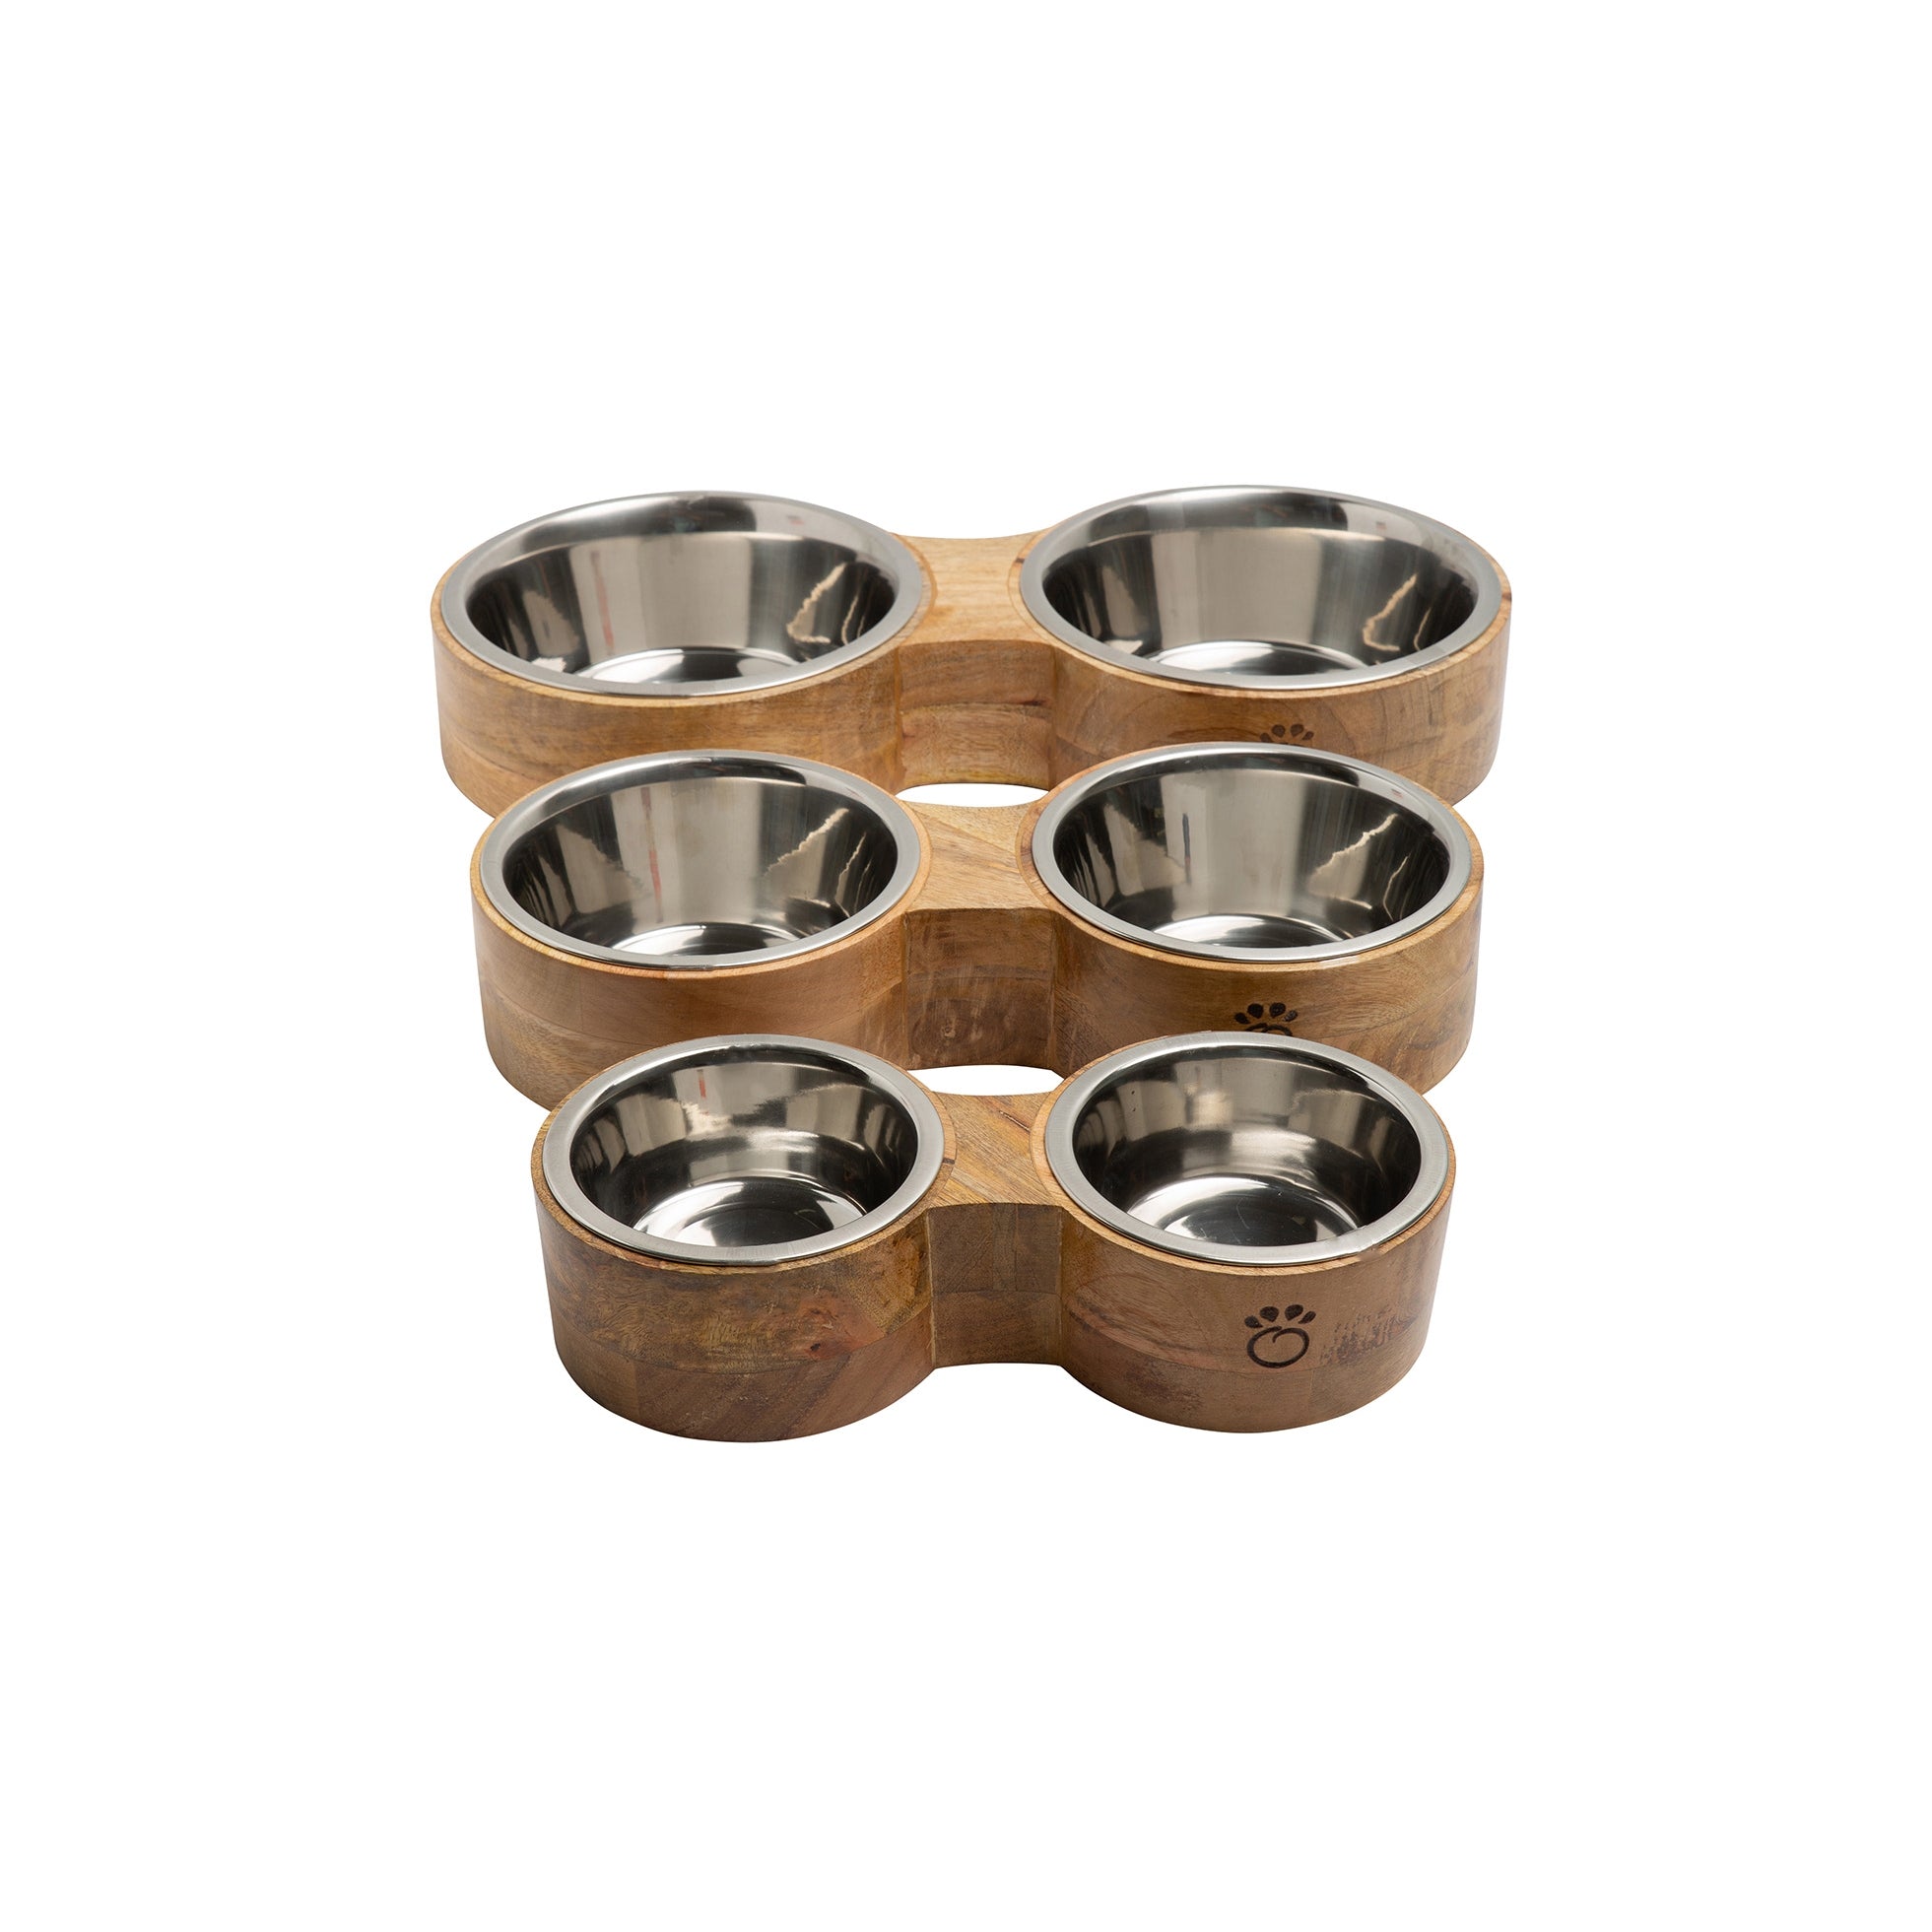 Pet Boutique - Dog Dining - Dog Bowls - Wood & Metal Double Dog Feeder by GF Pet